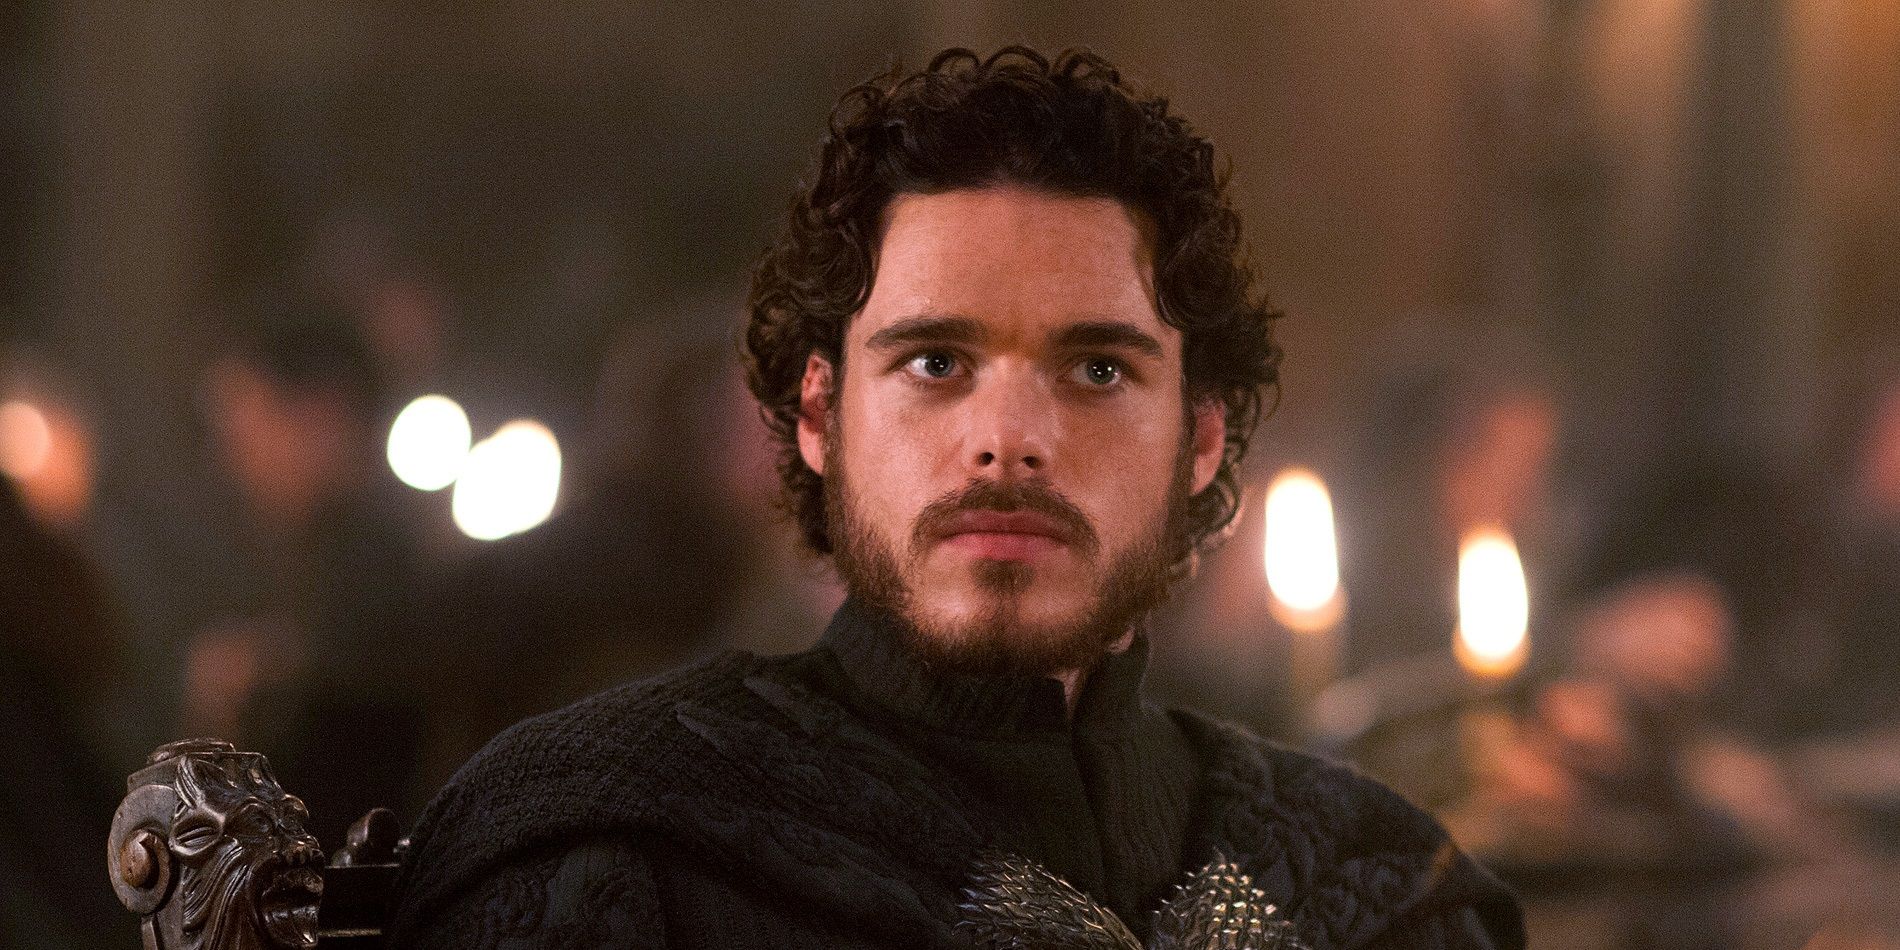 King Robb Stark played by Richard Madden on Game of Thrones